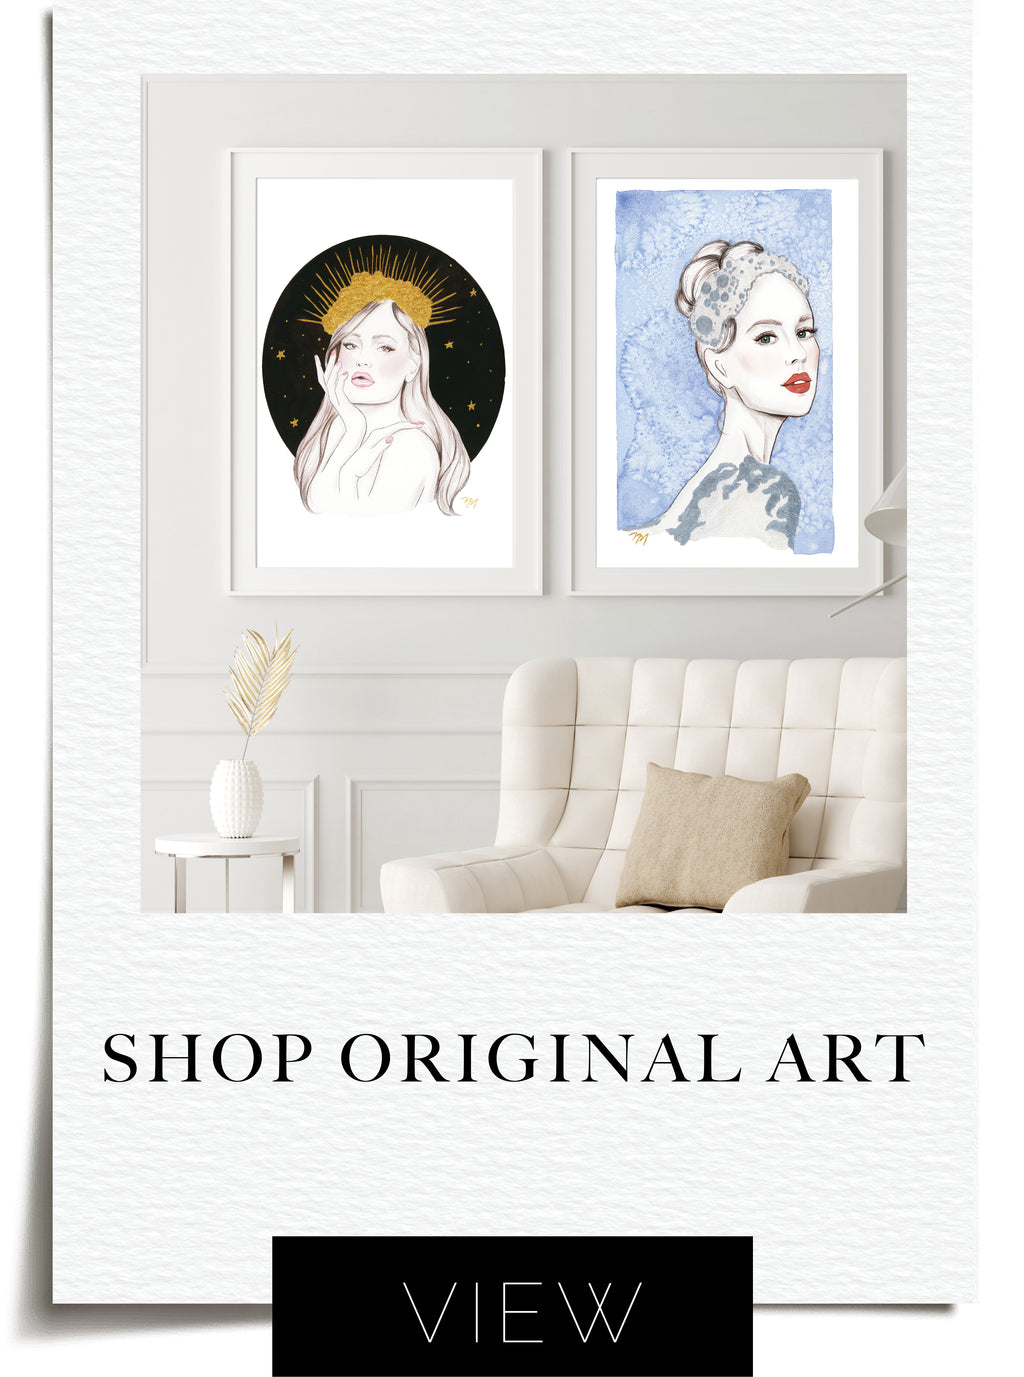 Original watercolor art by Nina Maric is perfect to add elegance to any space while getting a unique and special feel of the original artwork